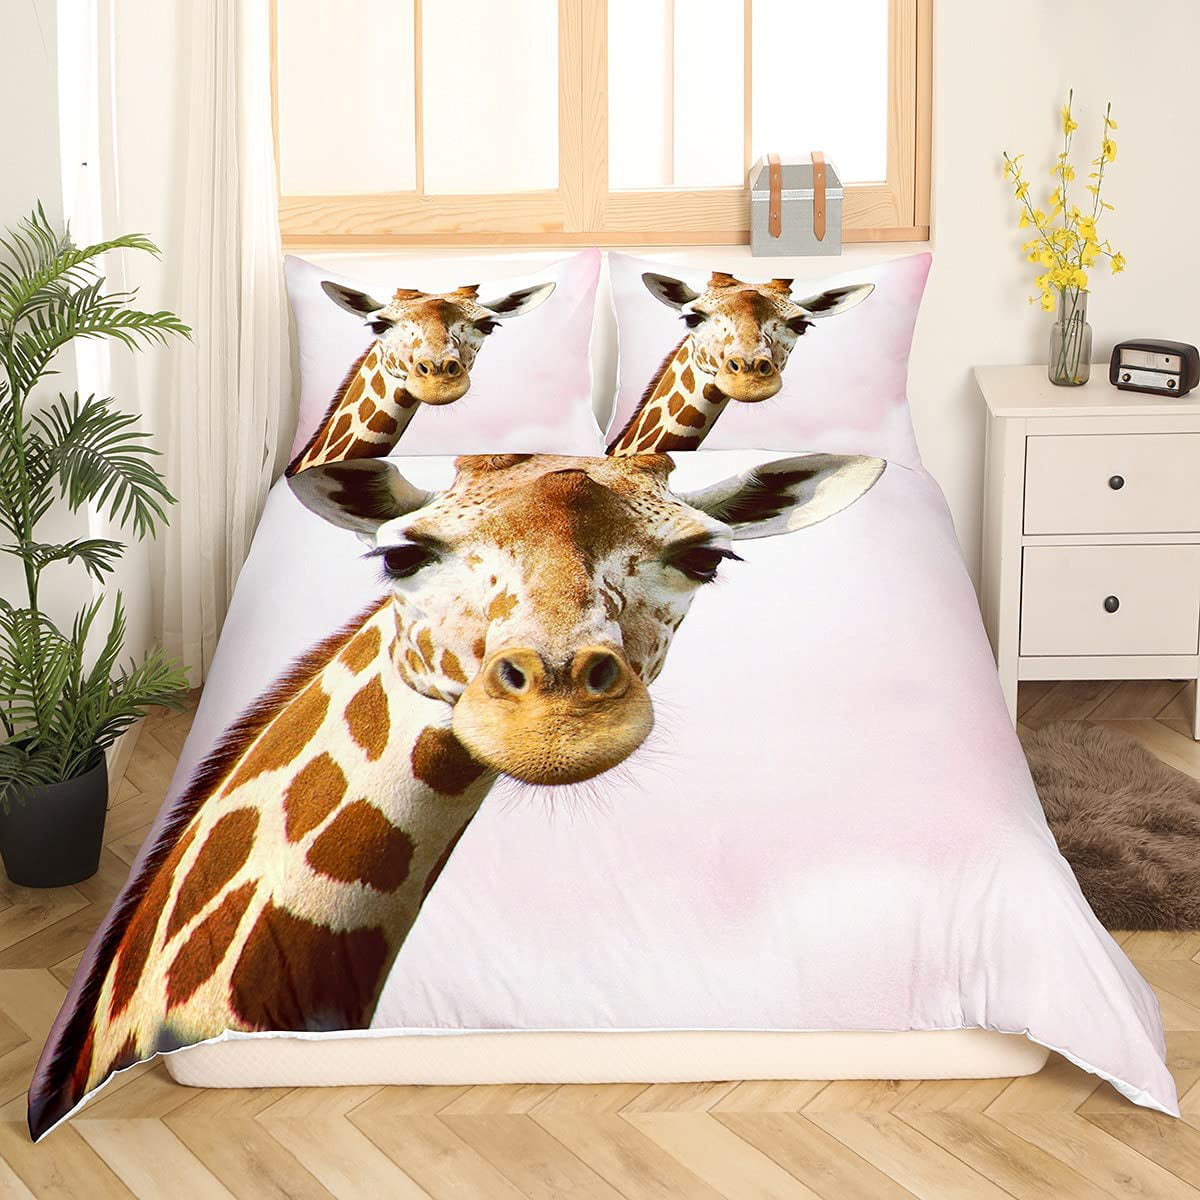 Tbrand Kids Bed Sheet Set Cartoon Animal Printed Bed Sheets Children Boys Girls Cute Elephant Giraffe Wildlife Bedding Set Safari Zoo Pattern Fitted Sheet Bedroom Collection 3Pcs Double Size 